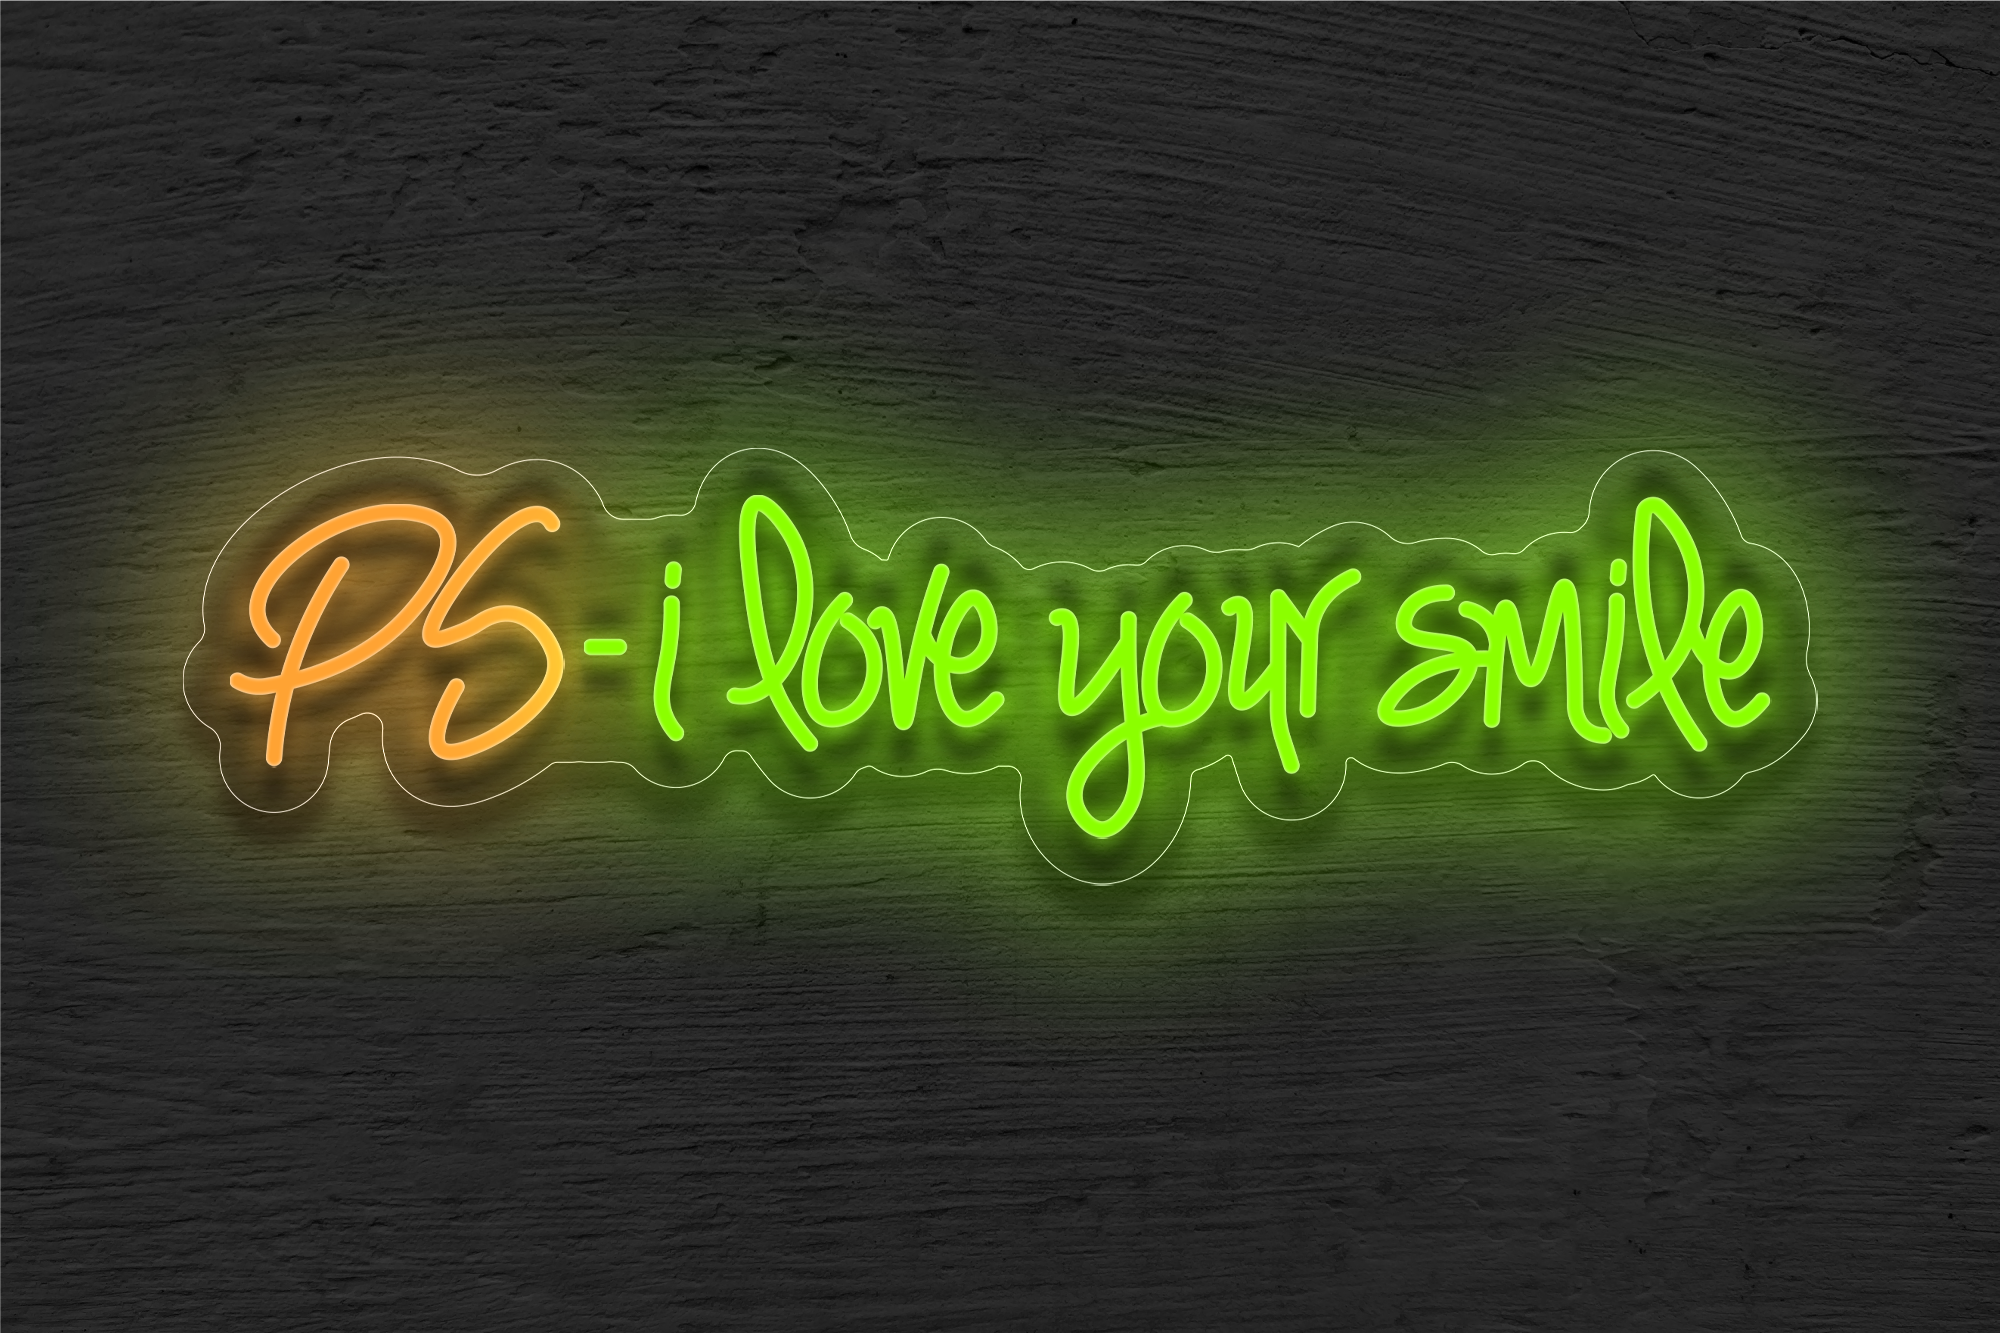 "PS.. i love your smile" LED Neon Sign